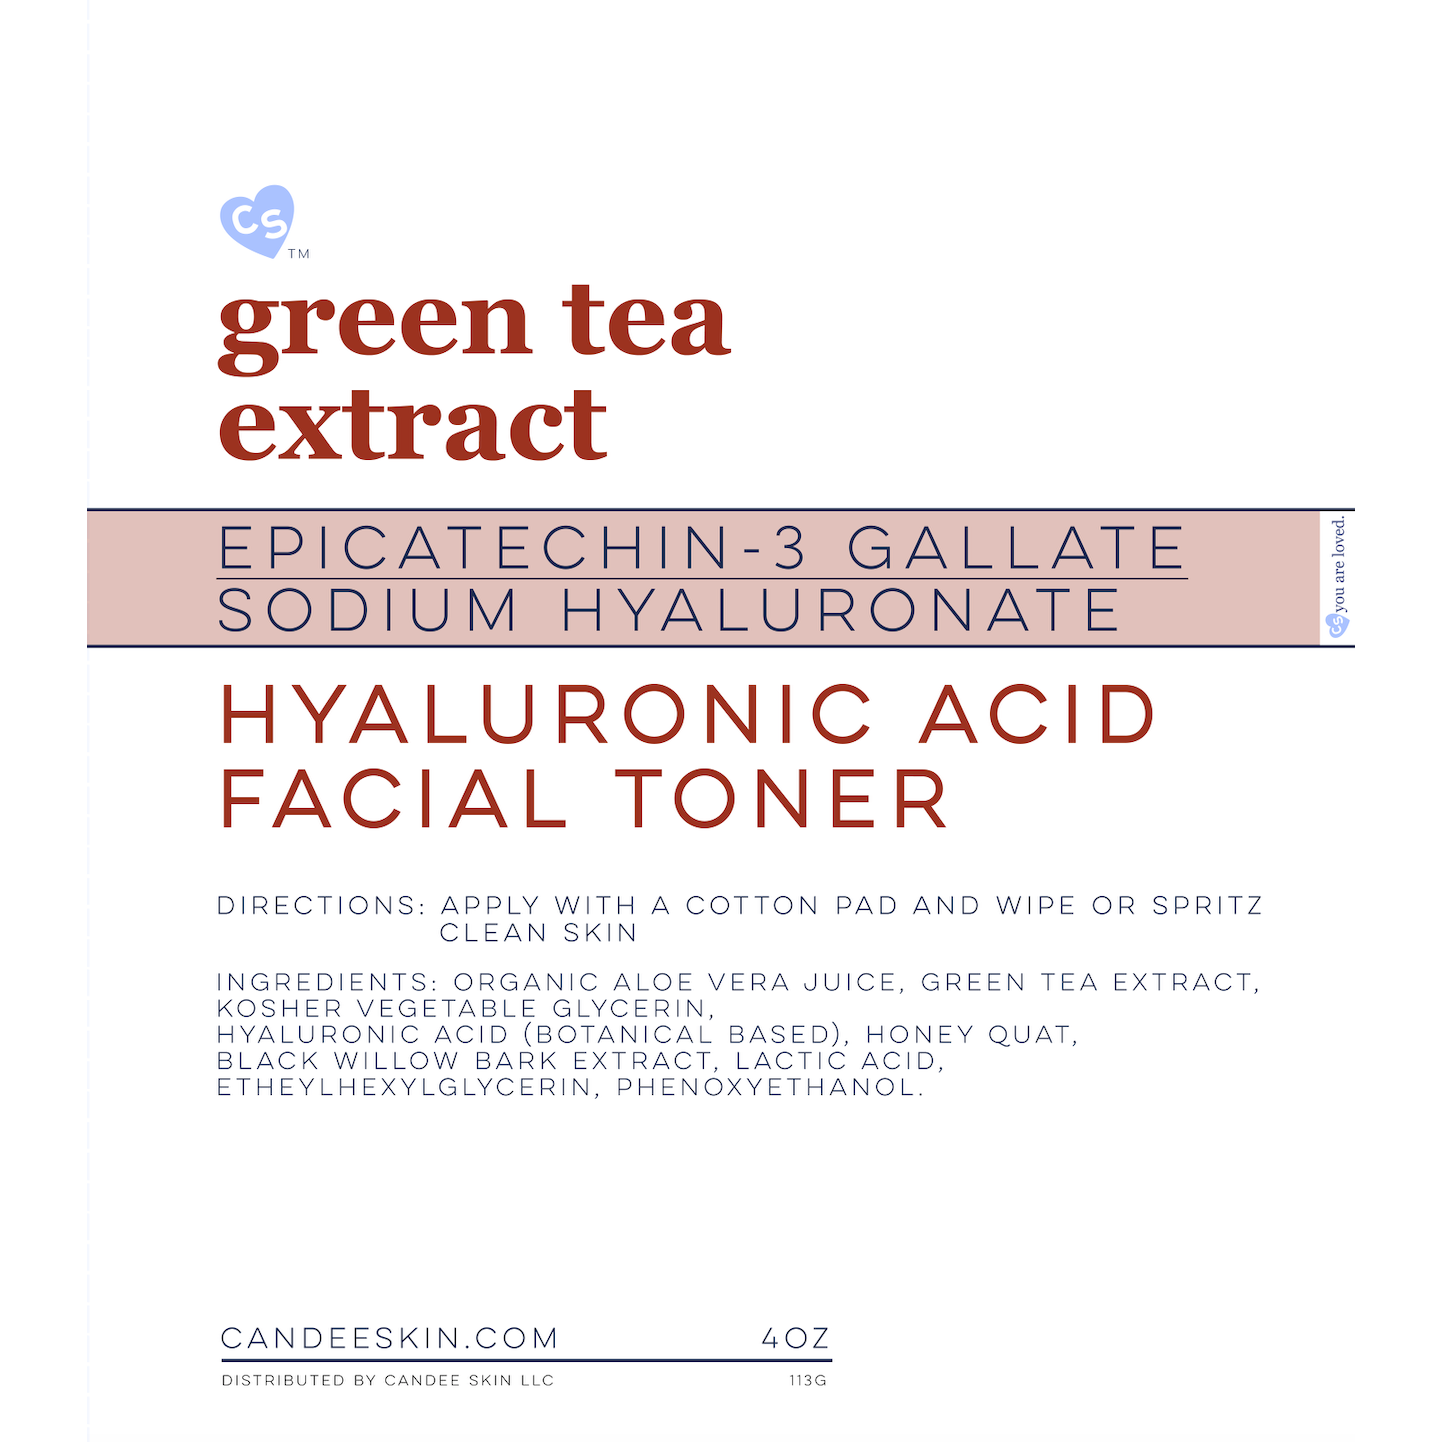 Green Tea Hyaluronic Acid Facial Toner Ingredients and Directions